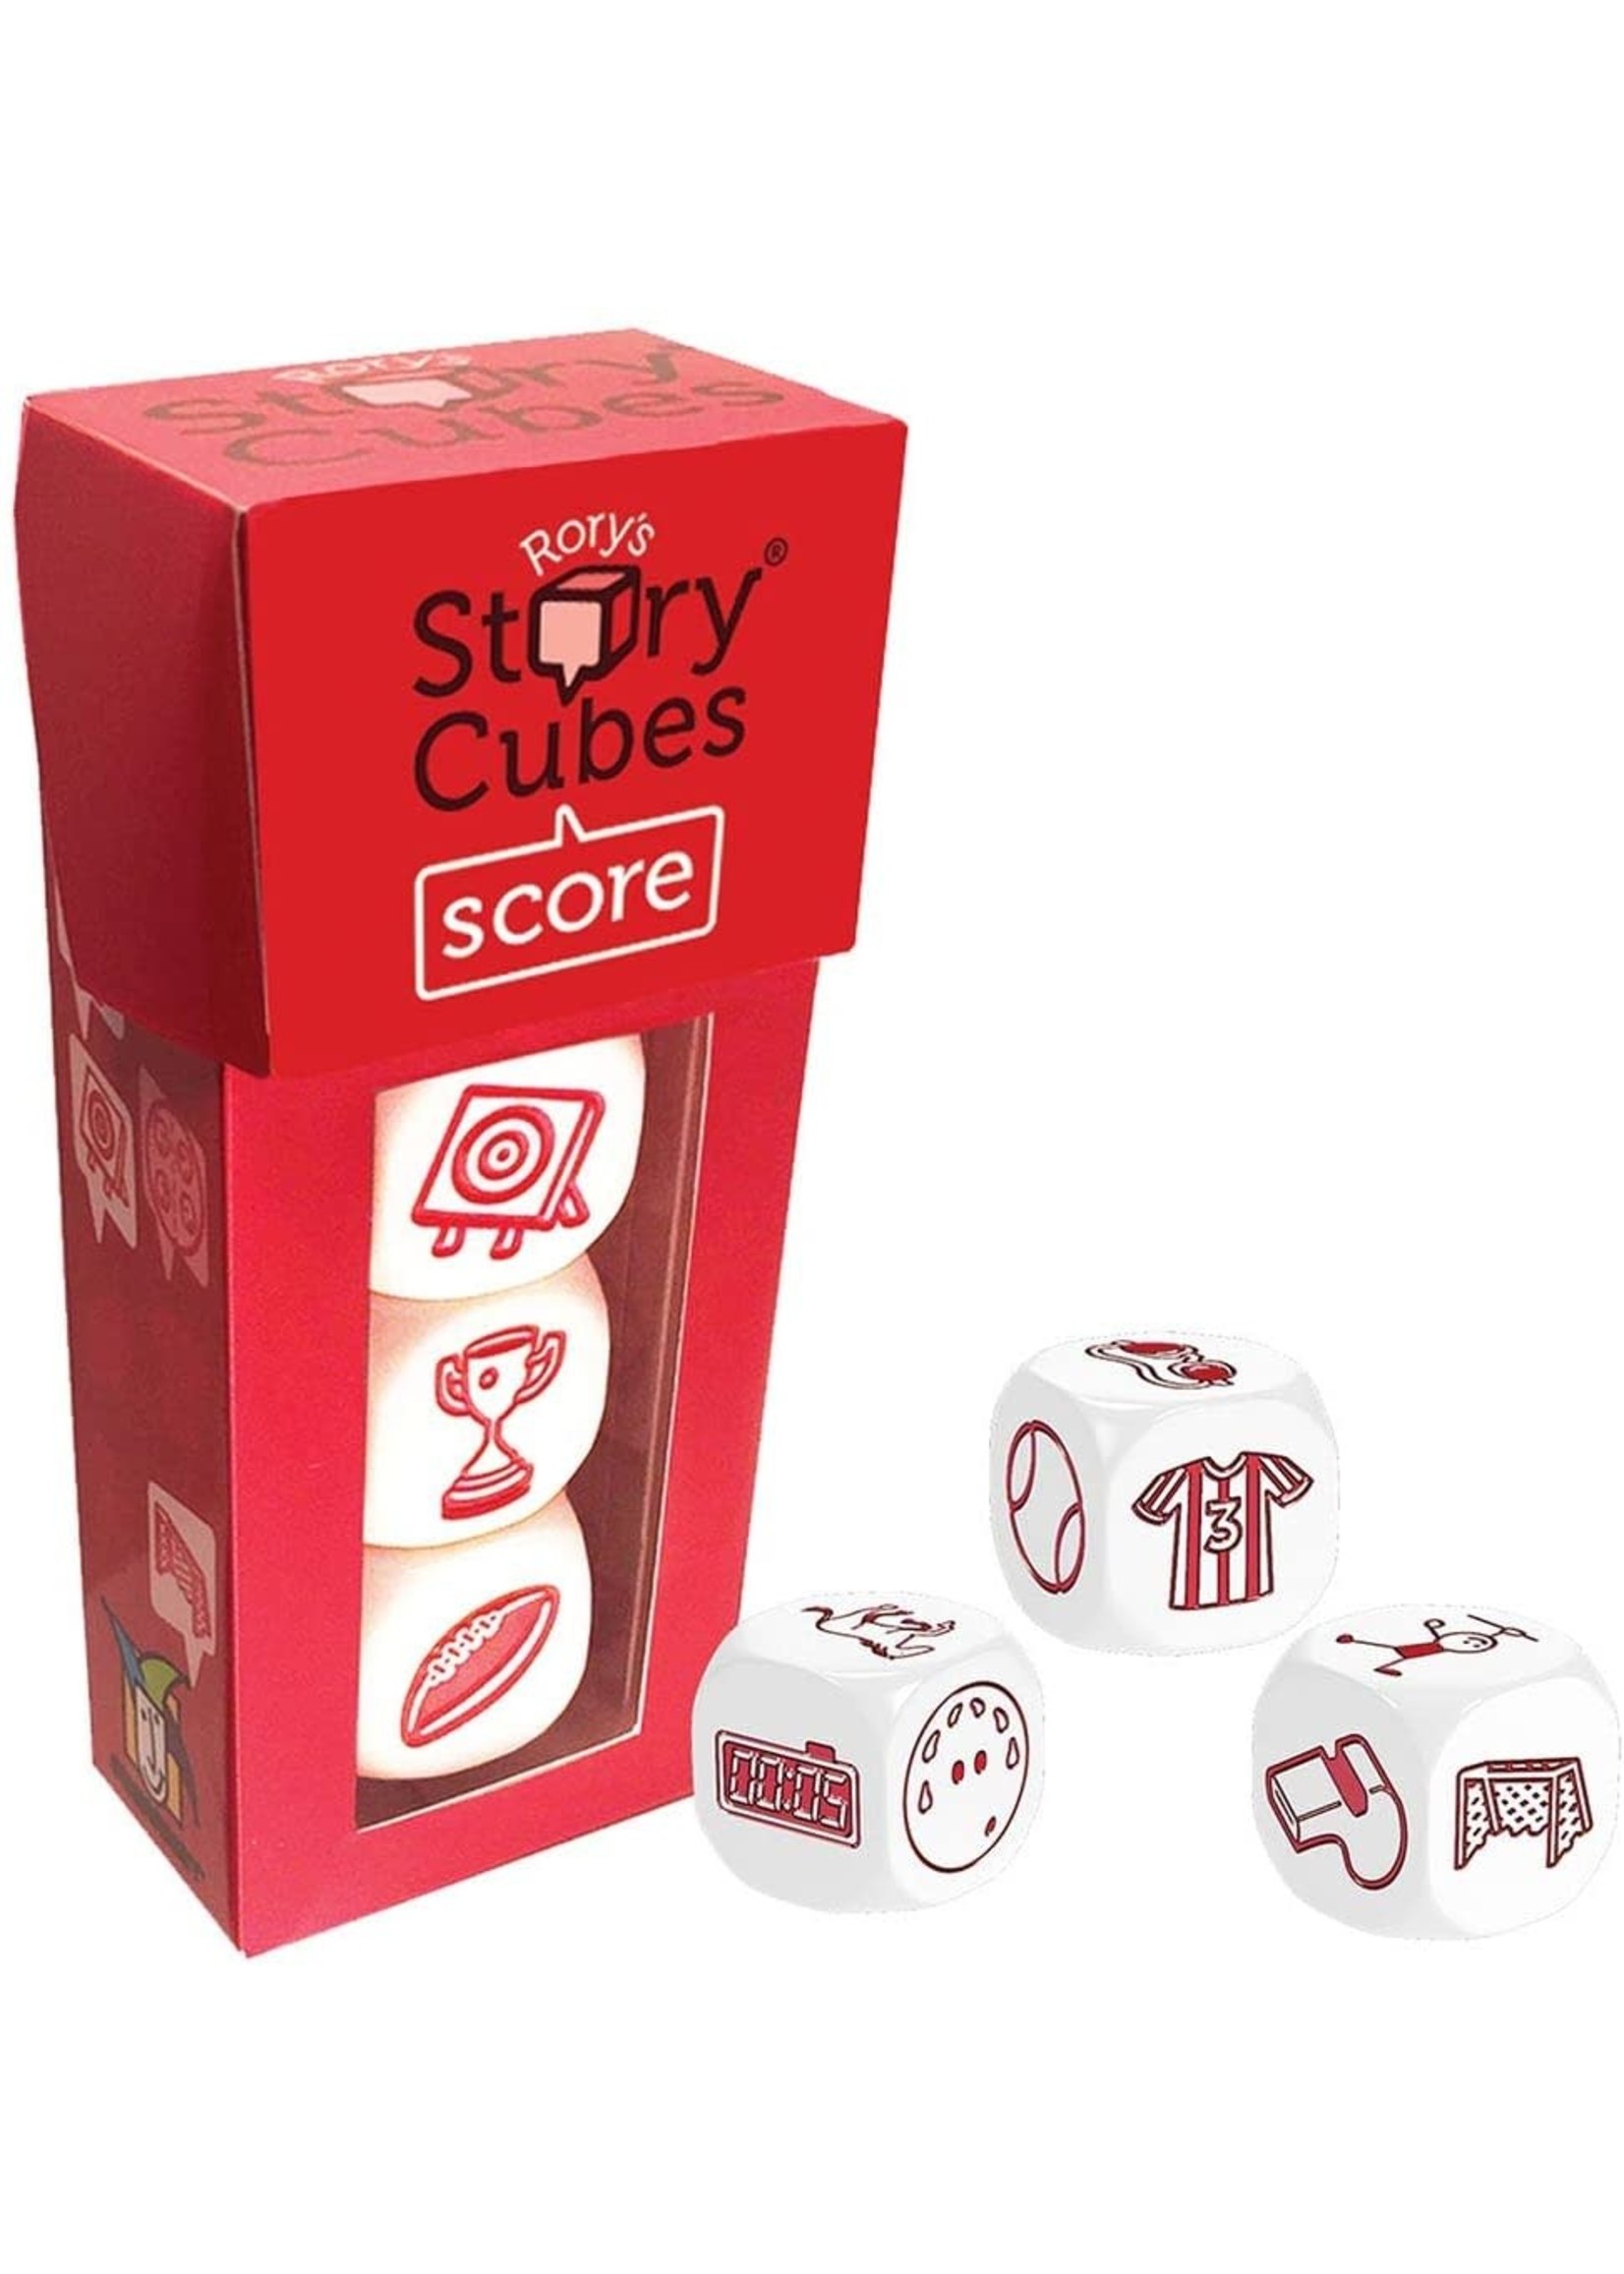 Rory's Story Cubes Score